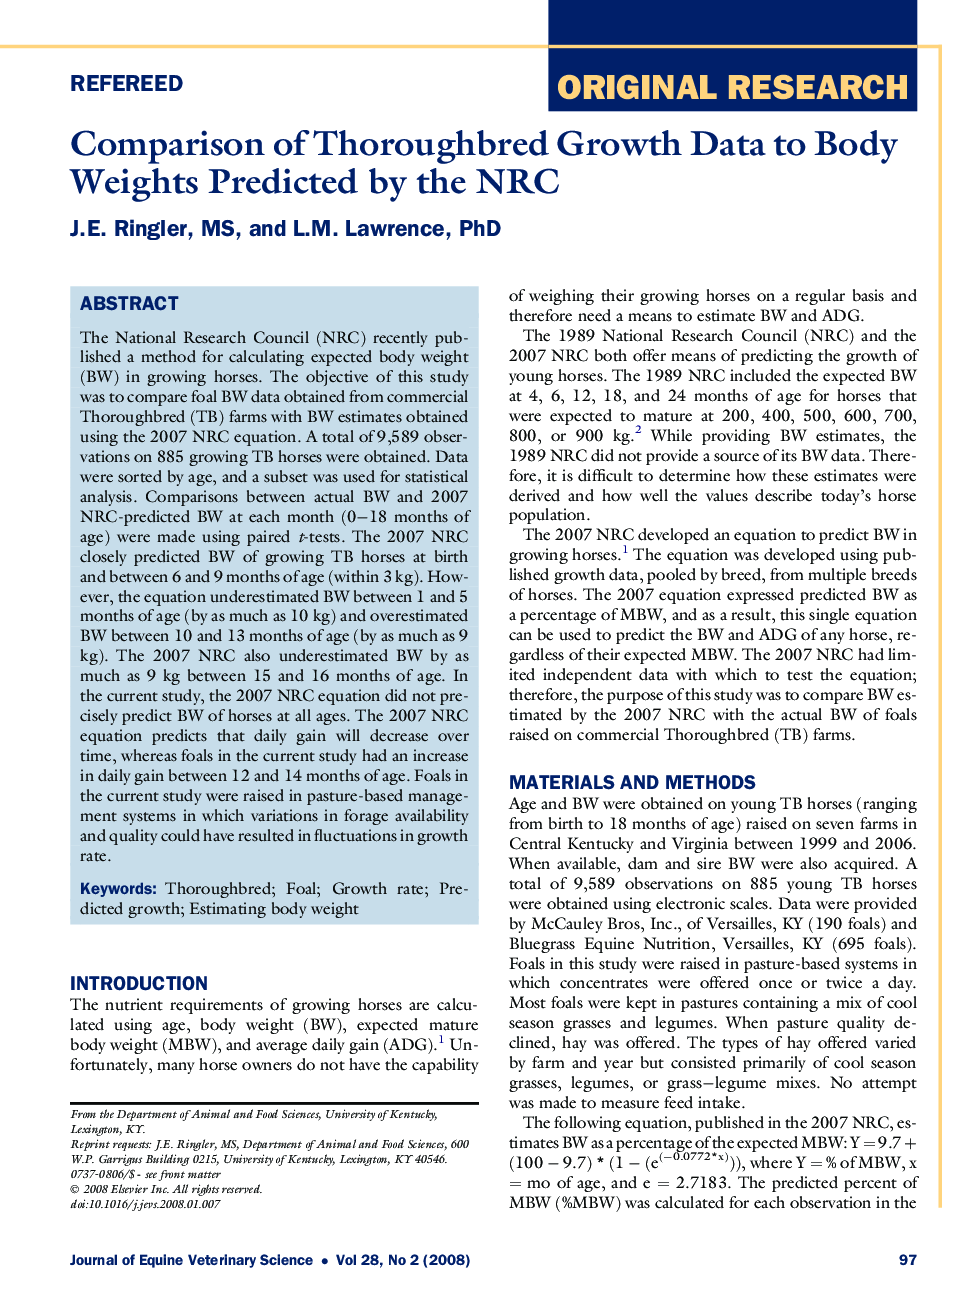 Comparison of Thoroughbred Growth Data to Body Weights Predicted by the NRC 